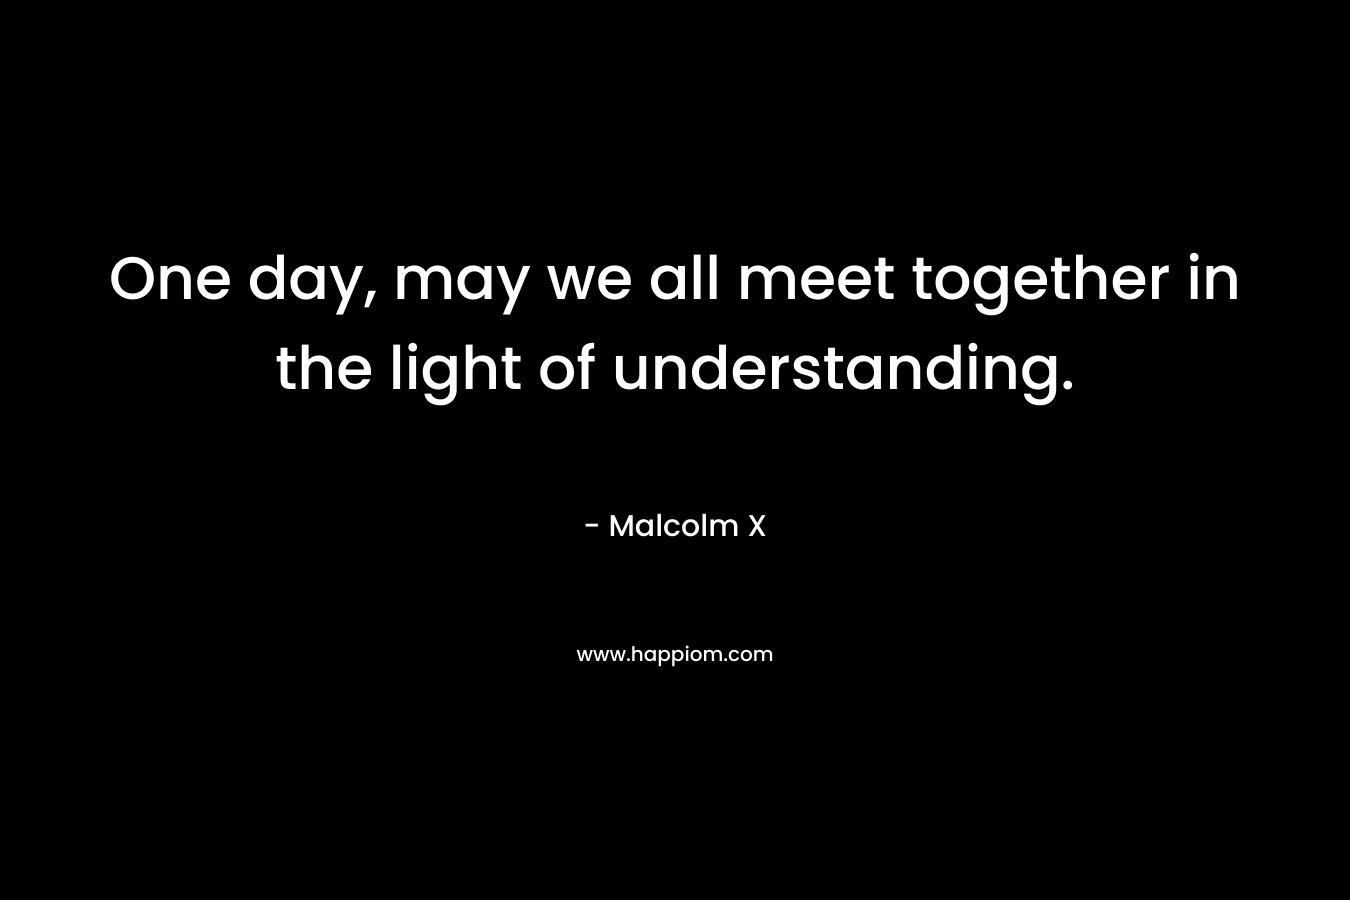 One day, may we all meet together in the light of understanding. – Malcolm X